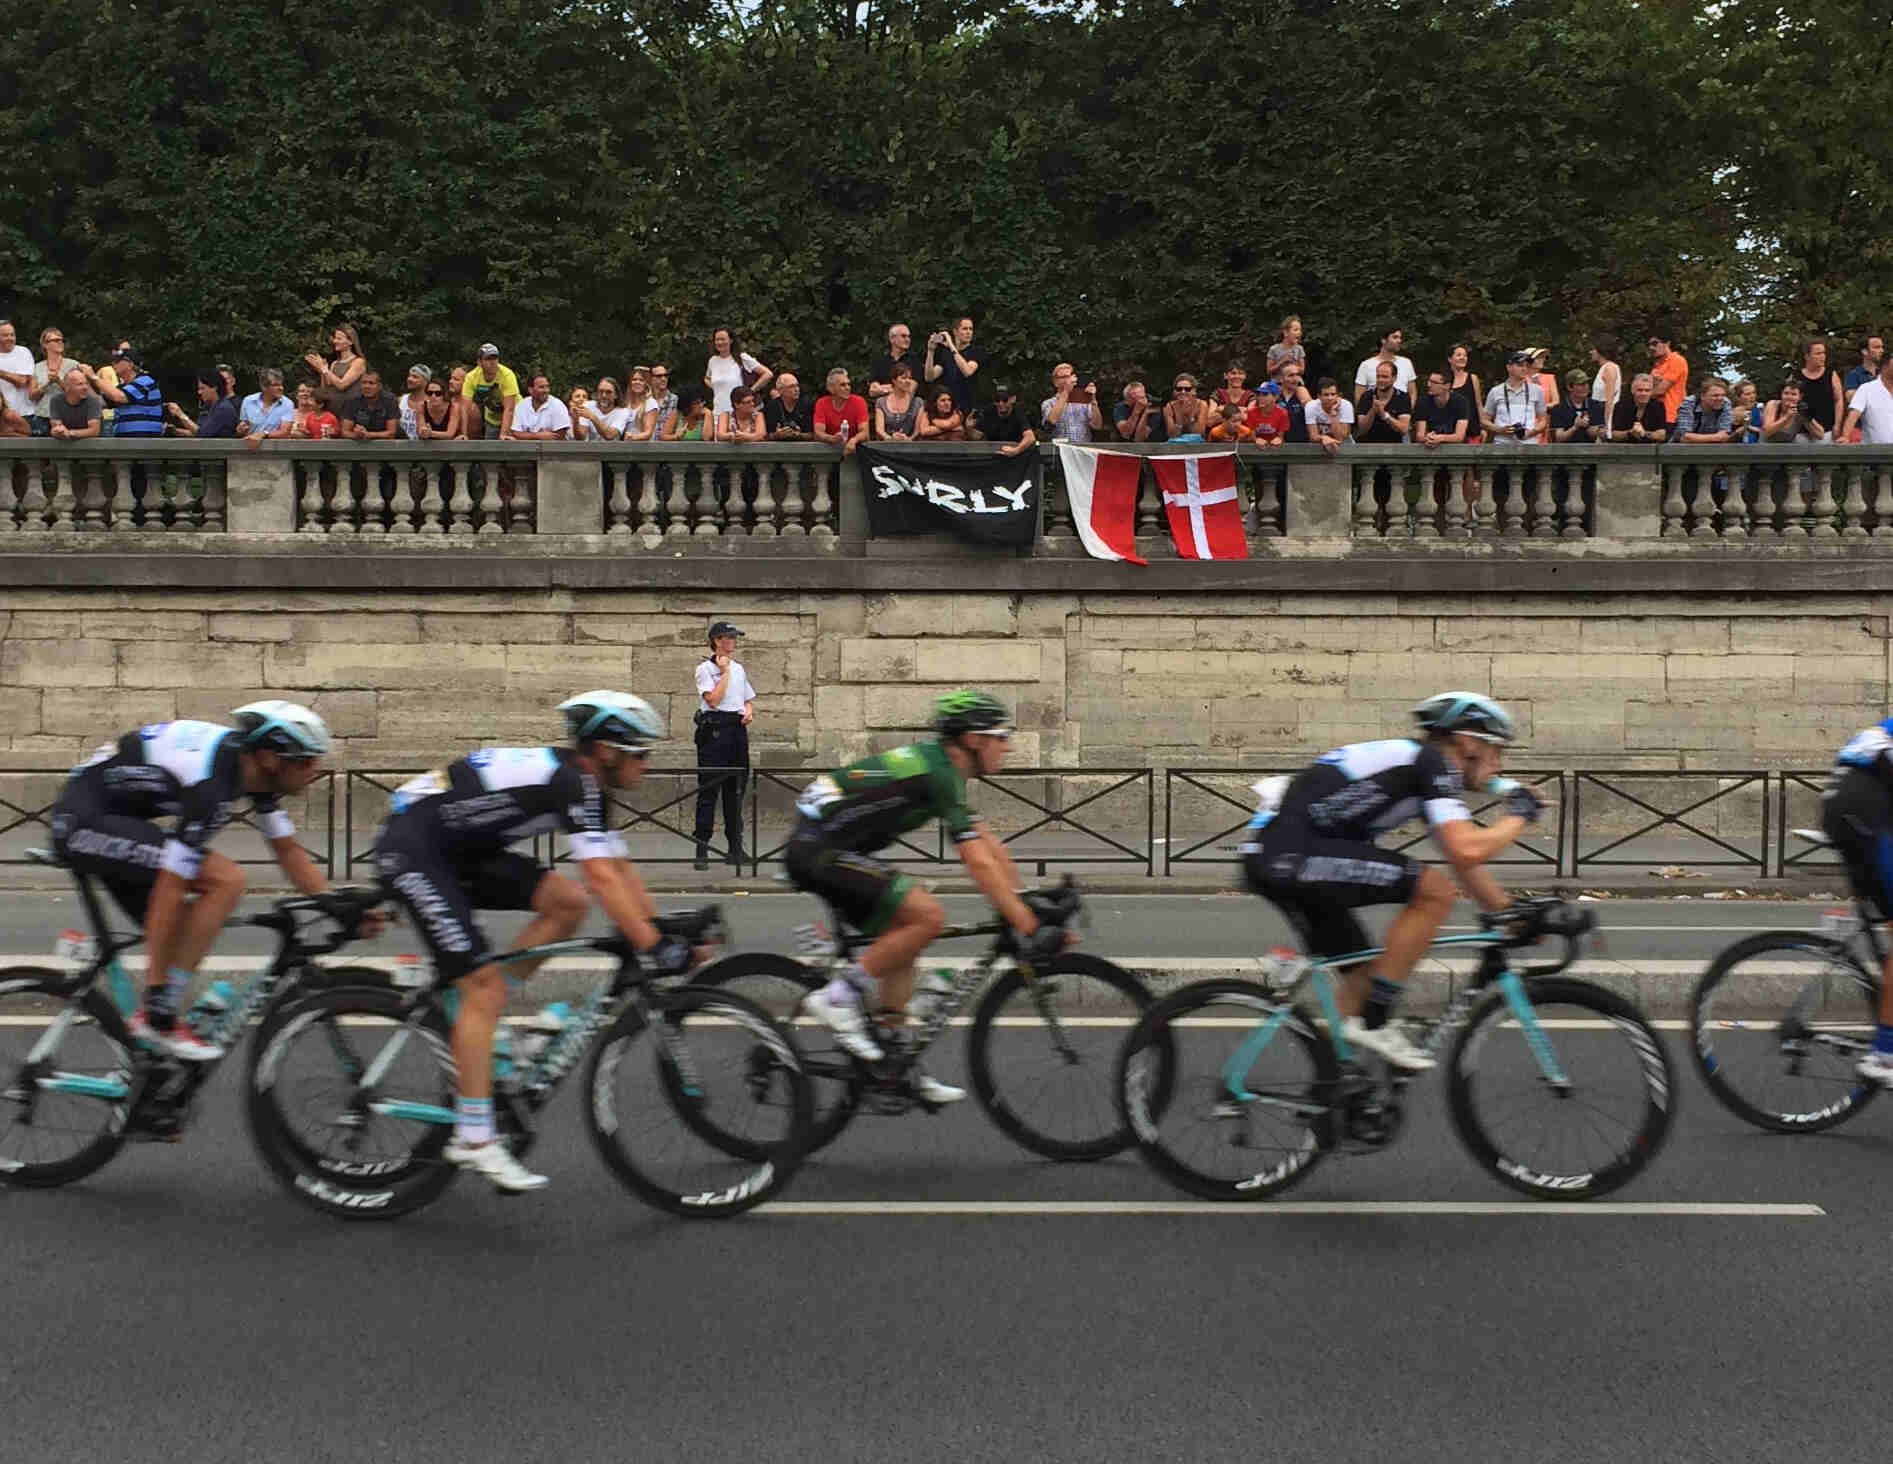 Right side view of cyclists riding their bikes down a street, with spectators above a wall, holding a Surly banner